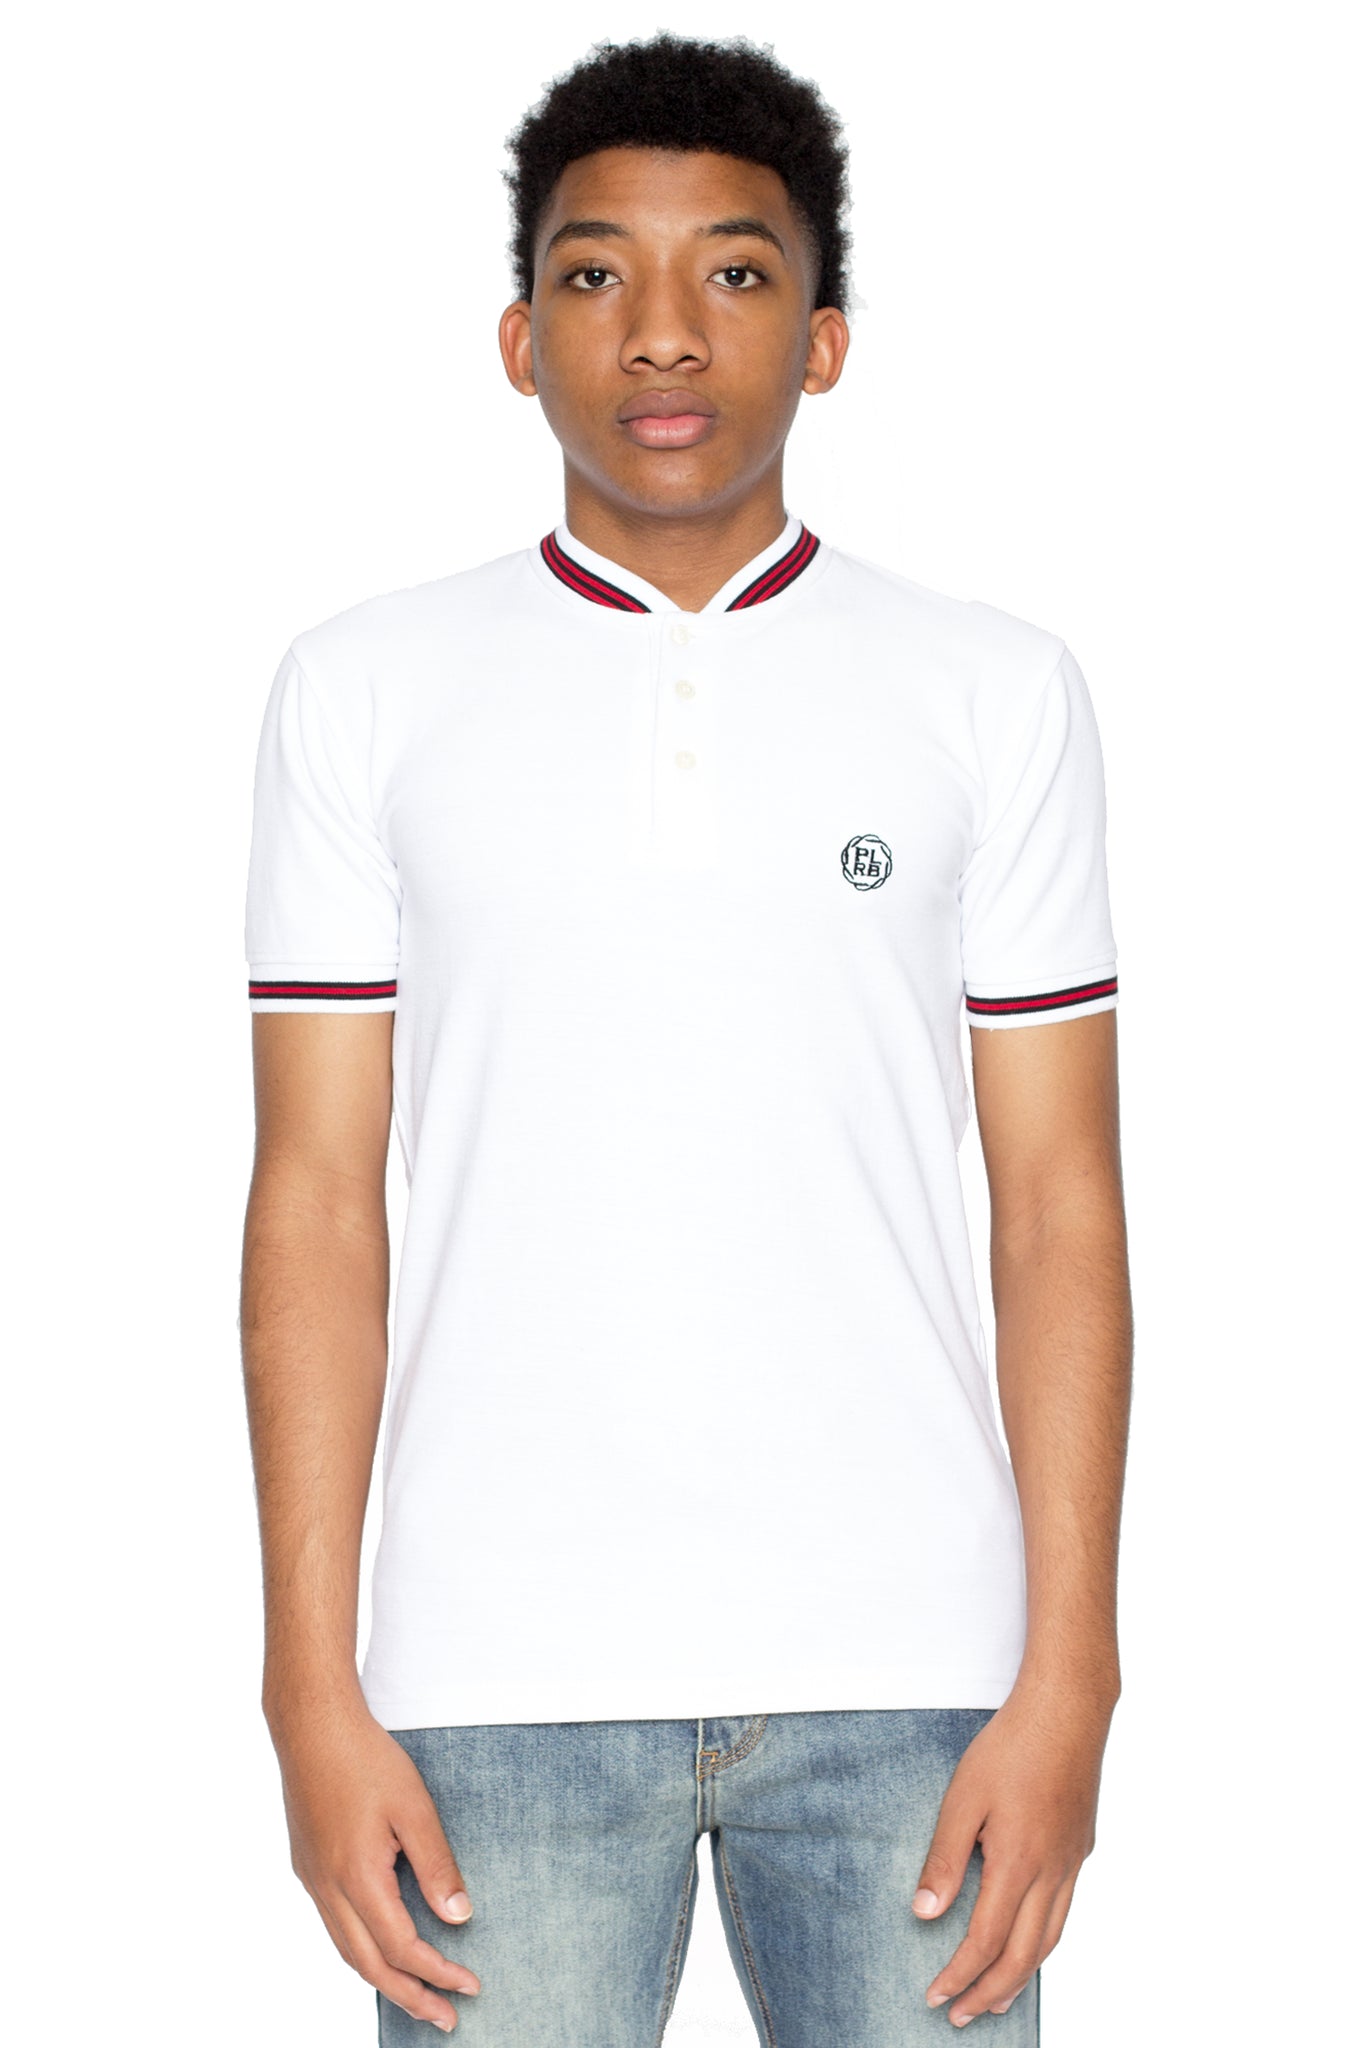 YOUNTVILLLE POLO SHIRT IN WHITE | Poor Little Rich Boy Clothing